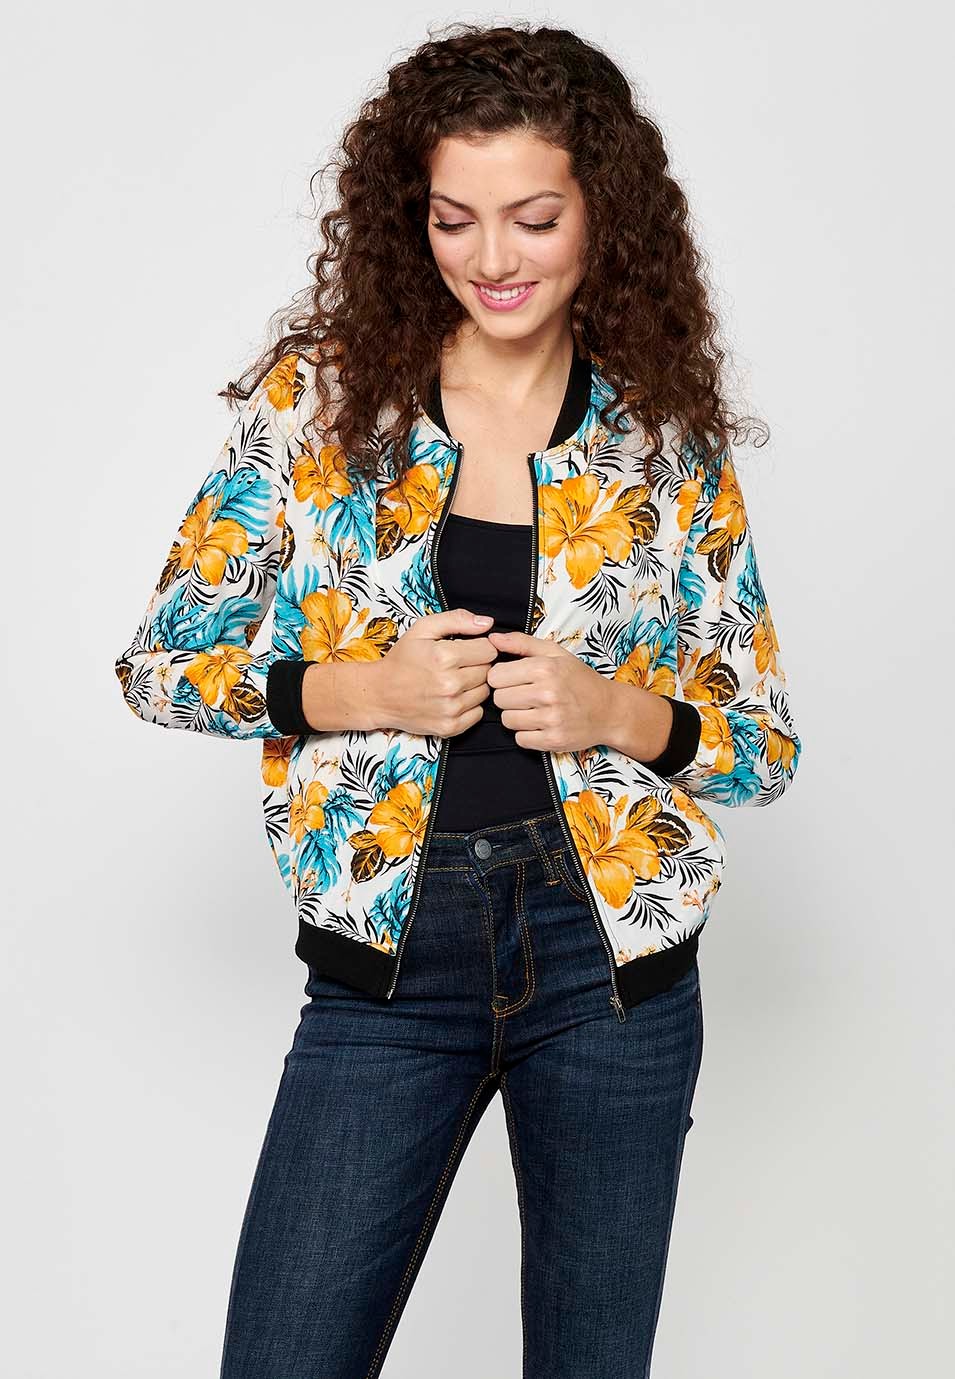 Long-sleeved sweatshirt jacket with ribbed finishes and floral print with front zipper closure. Composition 100% Polyester. White Color for Women from the Koröshi brand 6